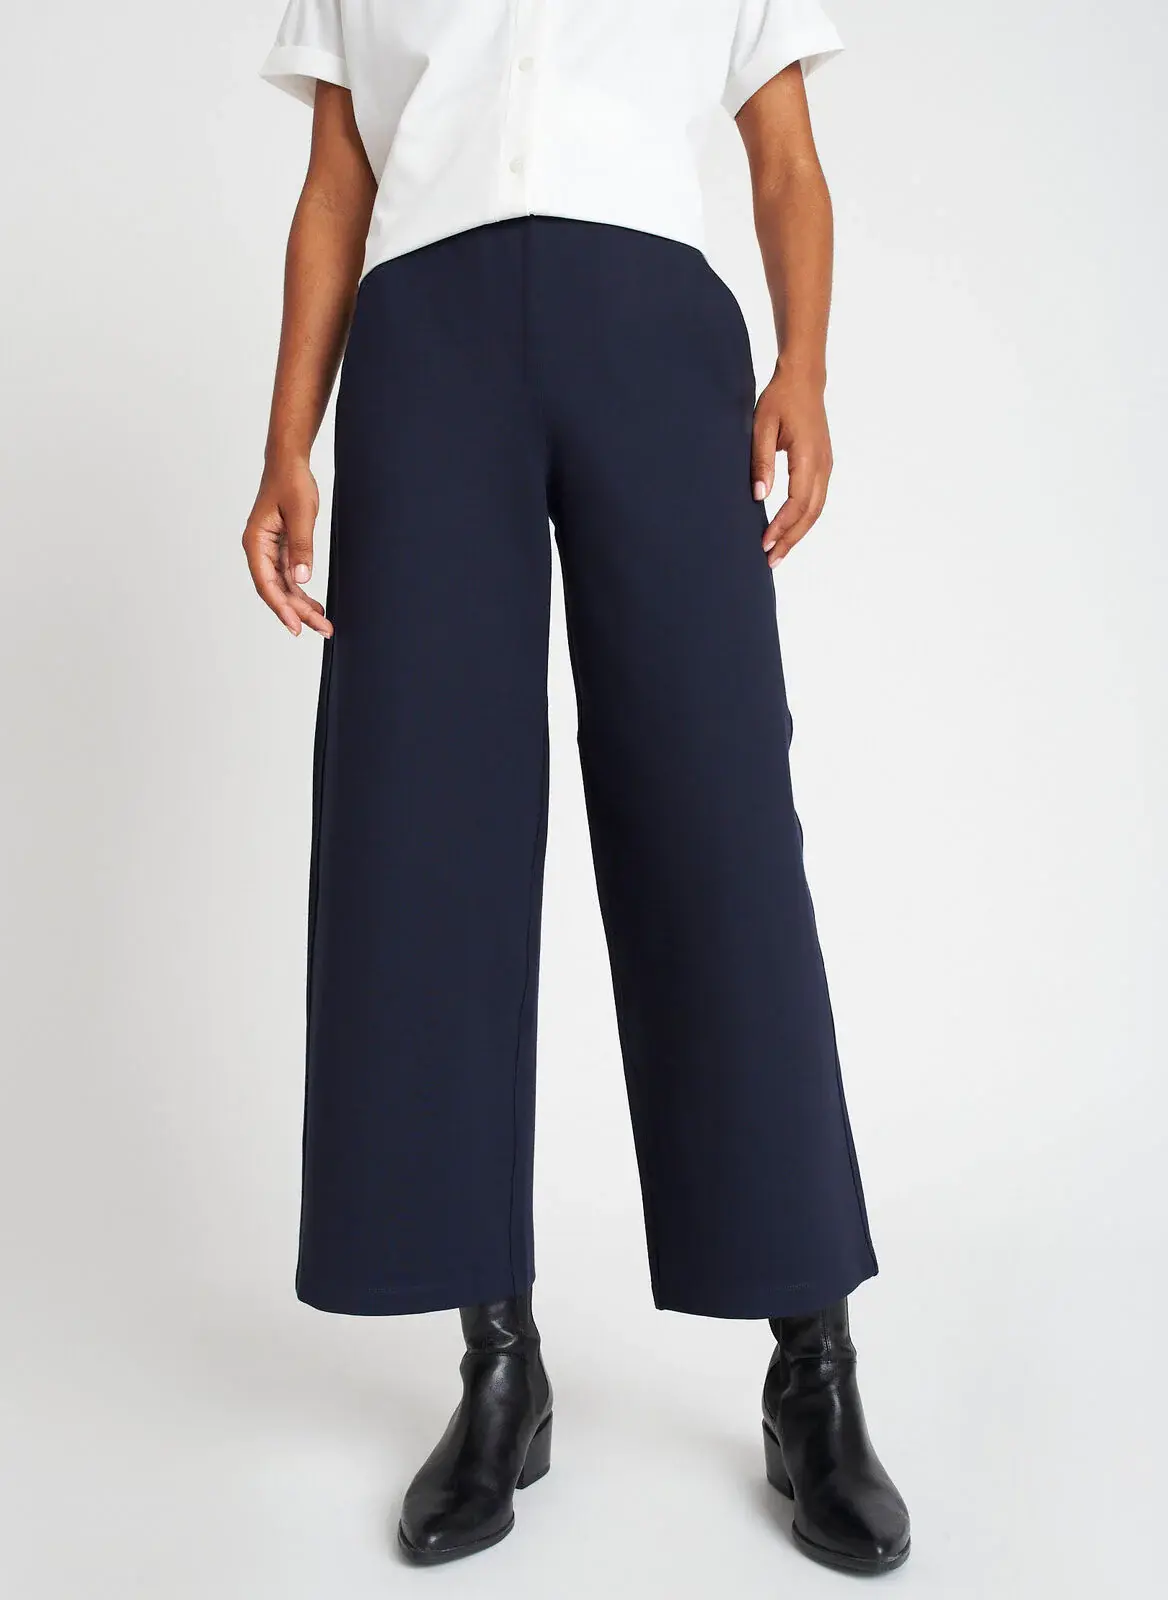 Kit And Ace Serenity Double Knit Wide Leg Pants. 1